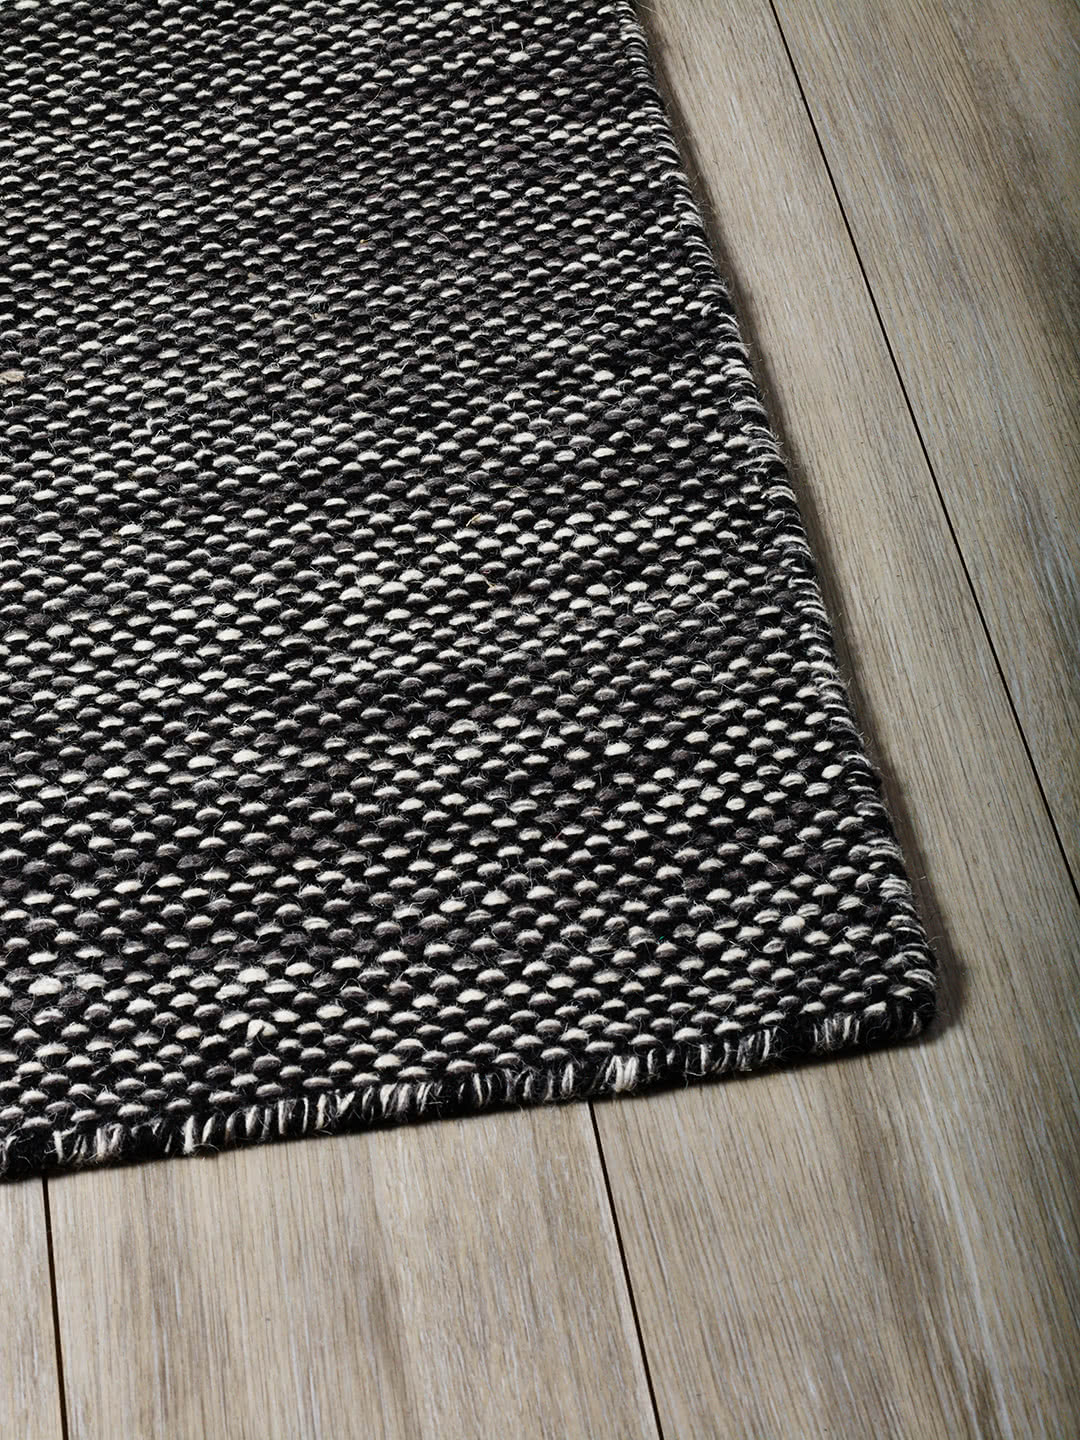 Subi Black Grey Rug 20% off from the Rug Collection Stockist Make Your House A Home, Furniture Store Bendigo. Free Australia Wide Delivery